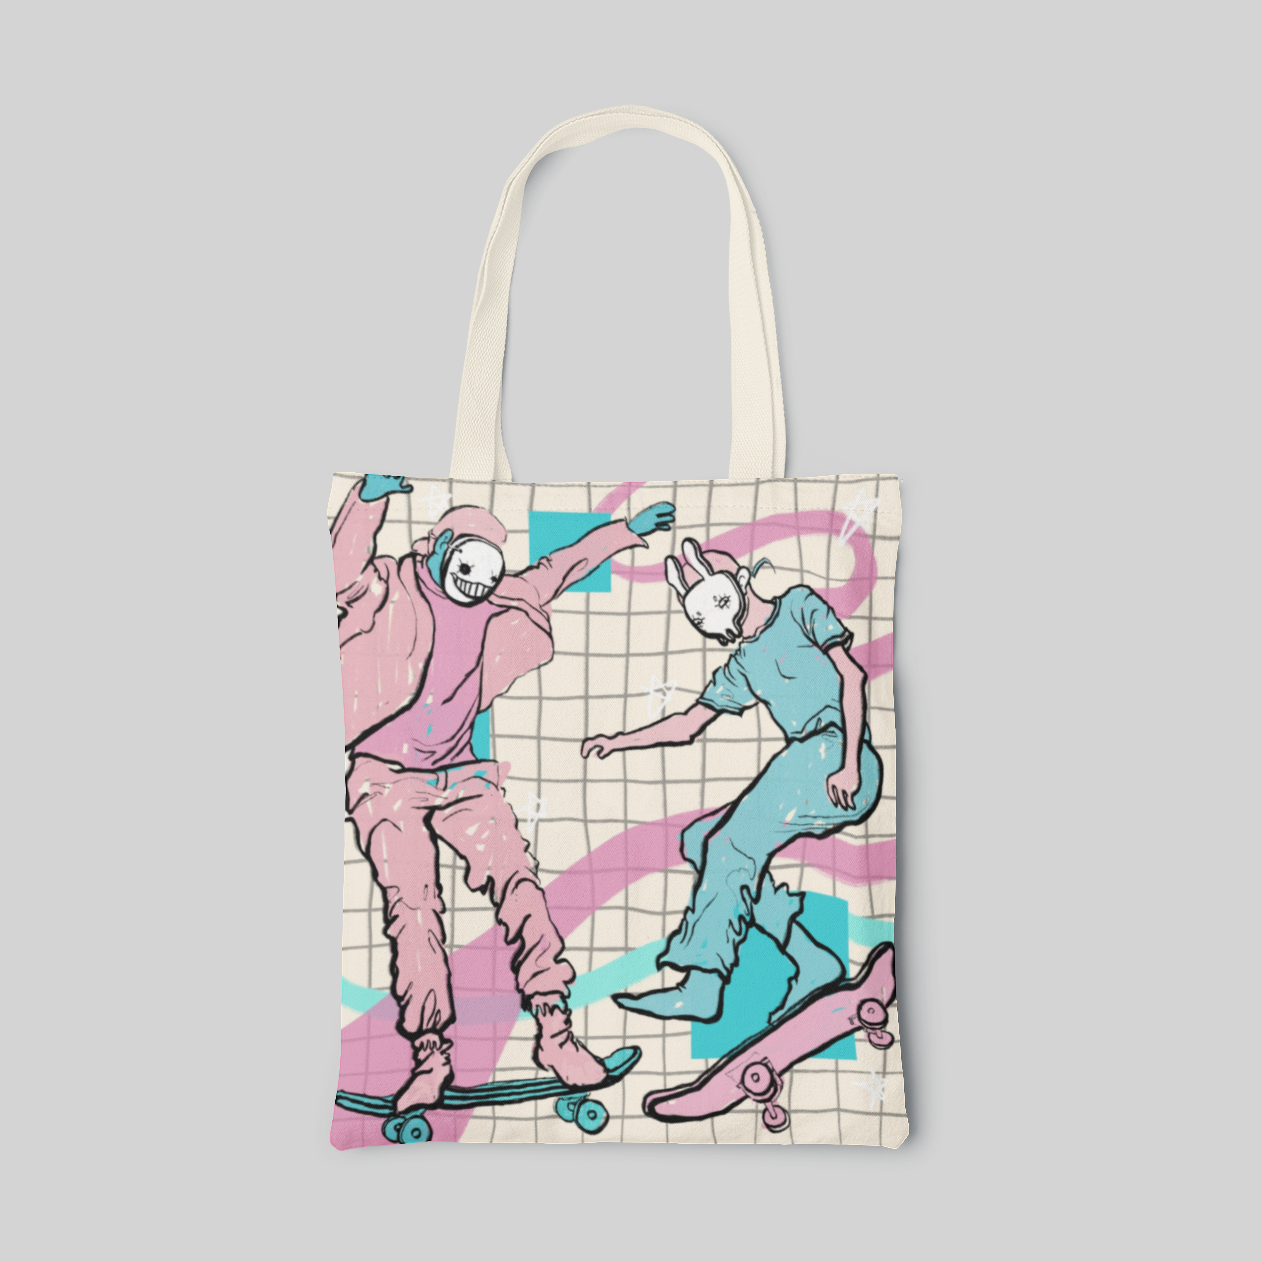 Skater themed tote bag with inner pockets 